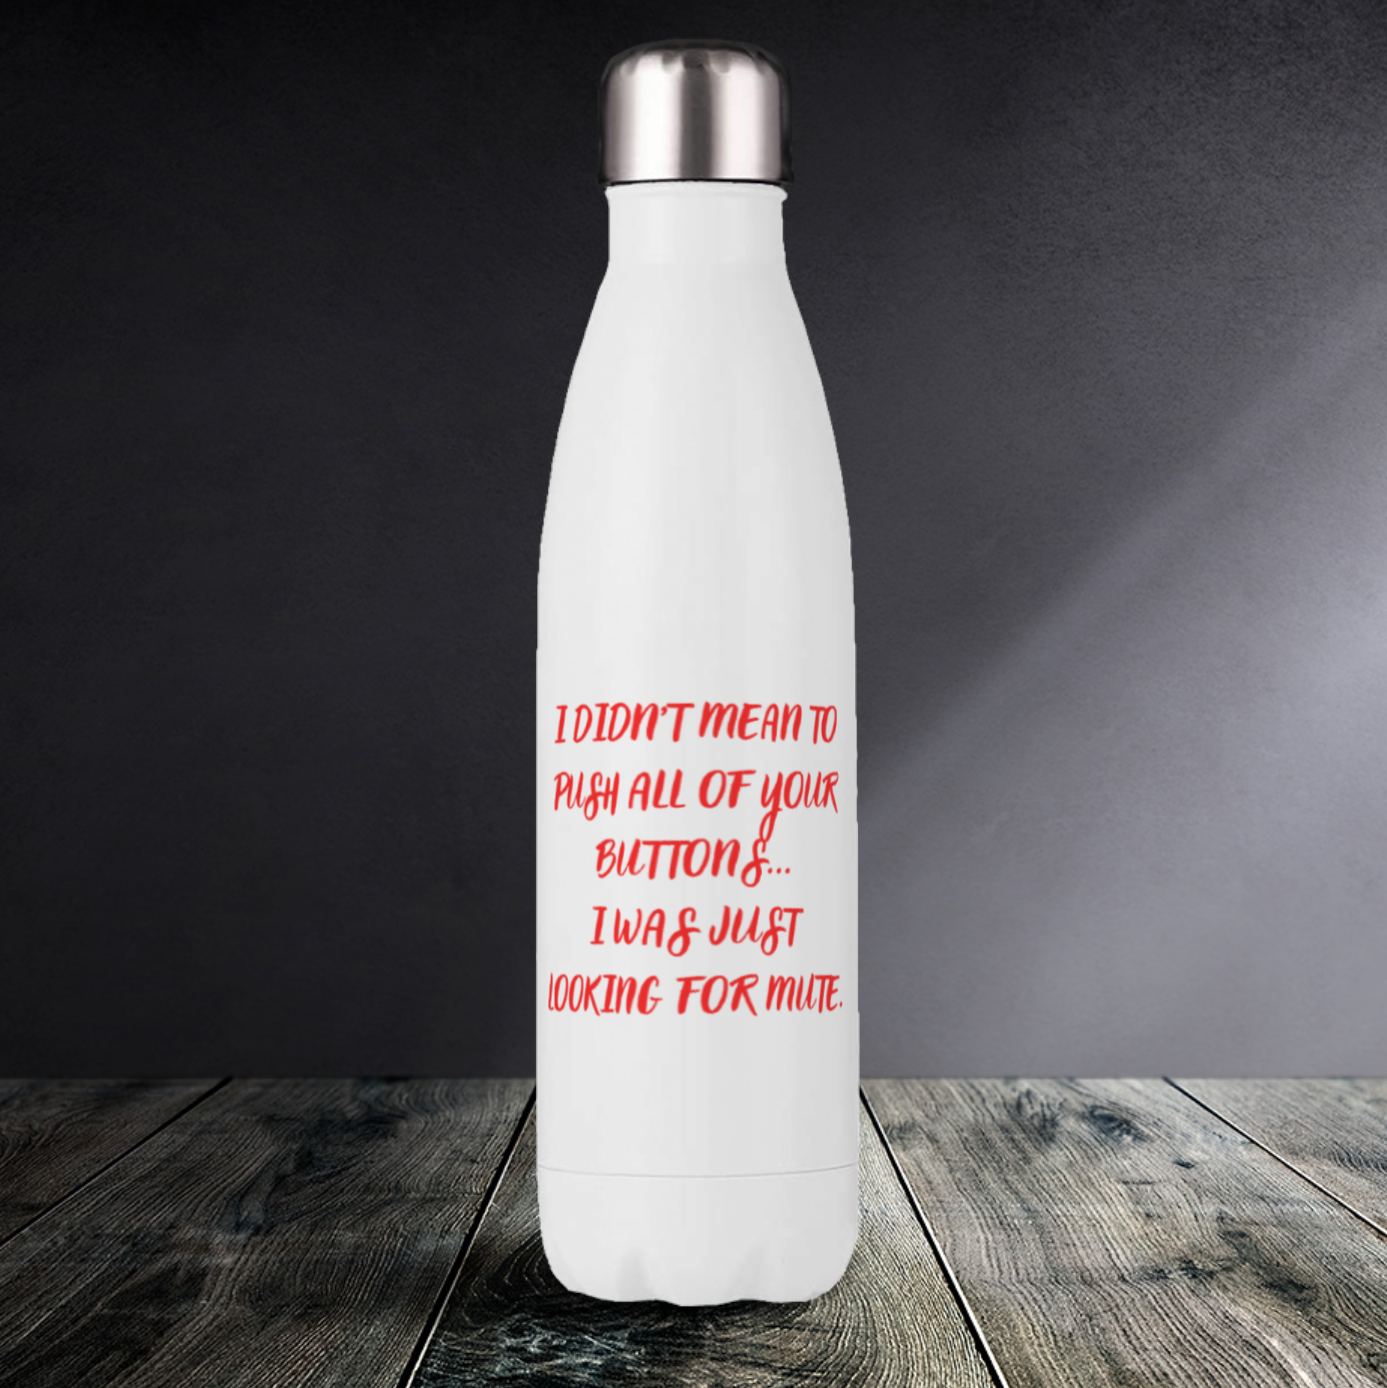 Push your buttons - Drink Bottles